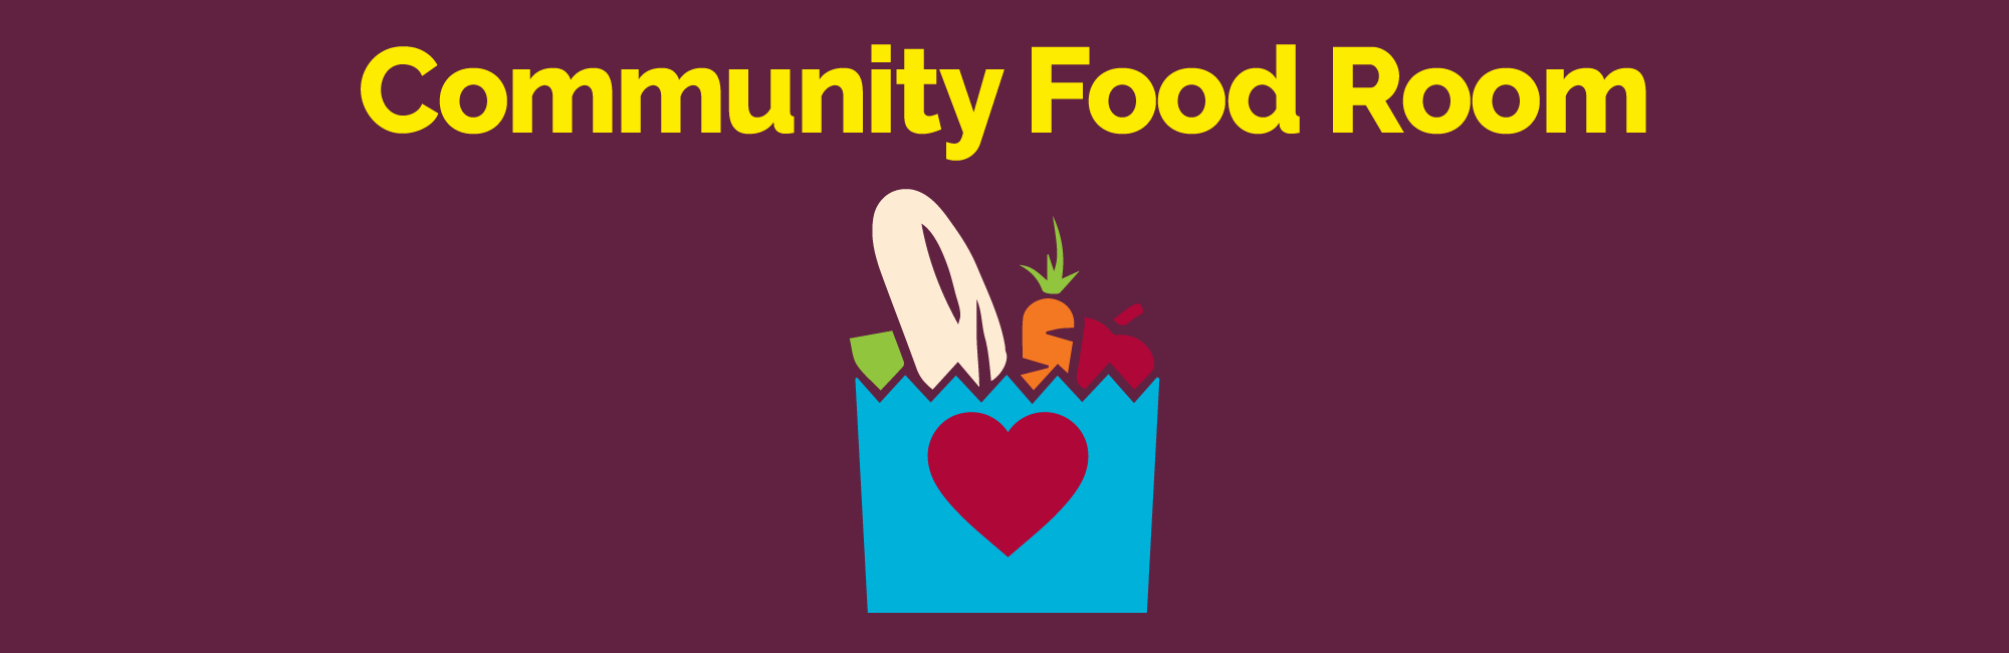 A graphic with Community Food Room and a bag holding food.